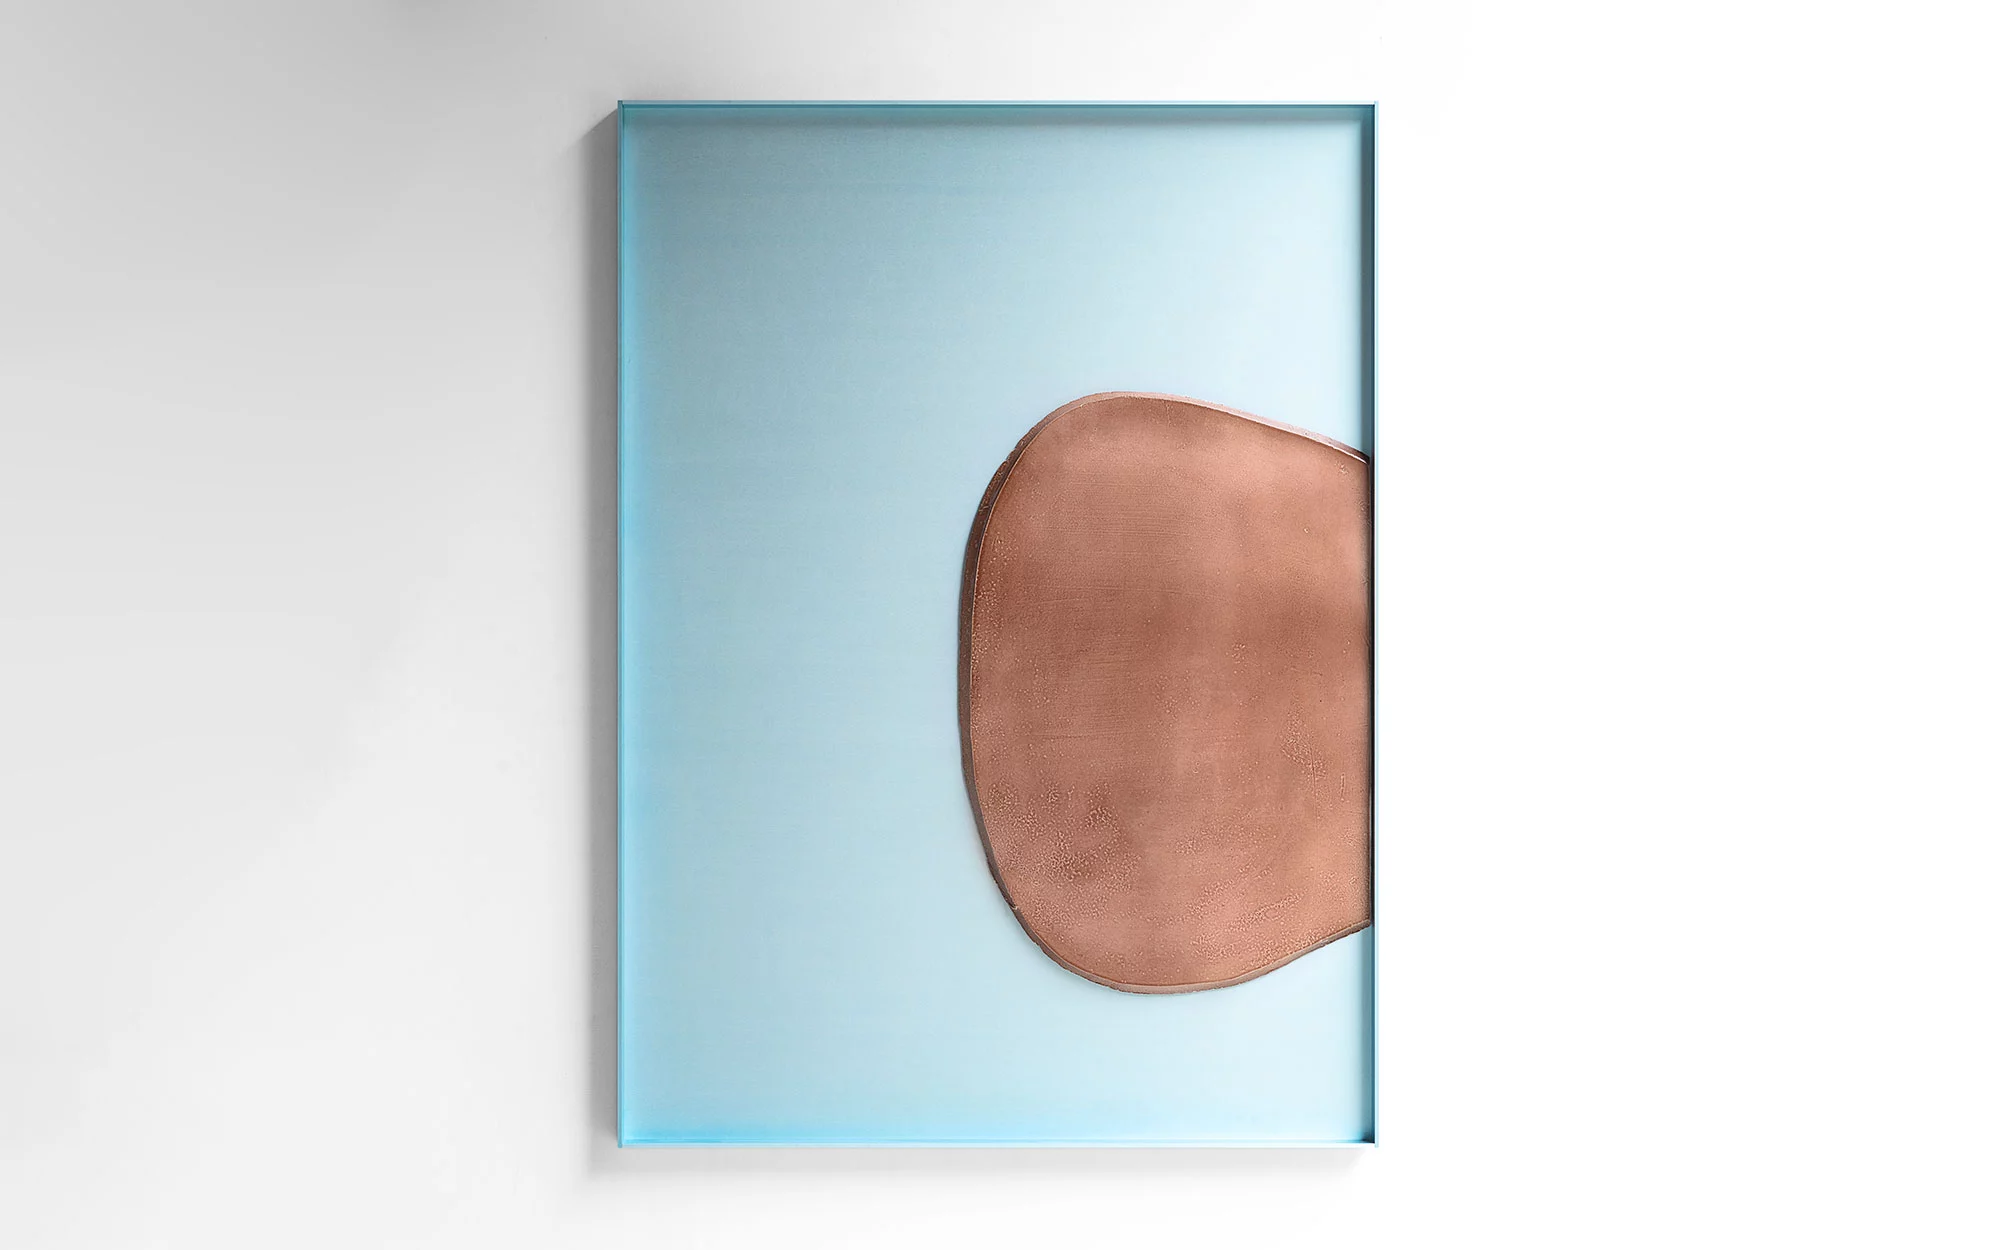 Bas-Relief LARGE  - Ronan Bouroullec - Miscellaneous - Galerie kreo